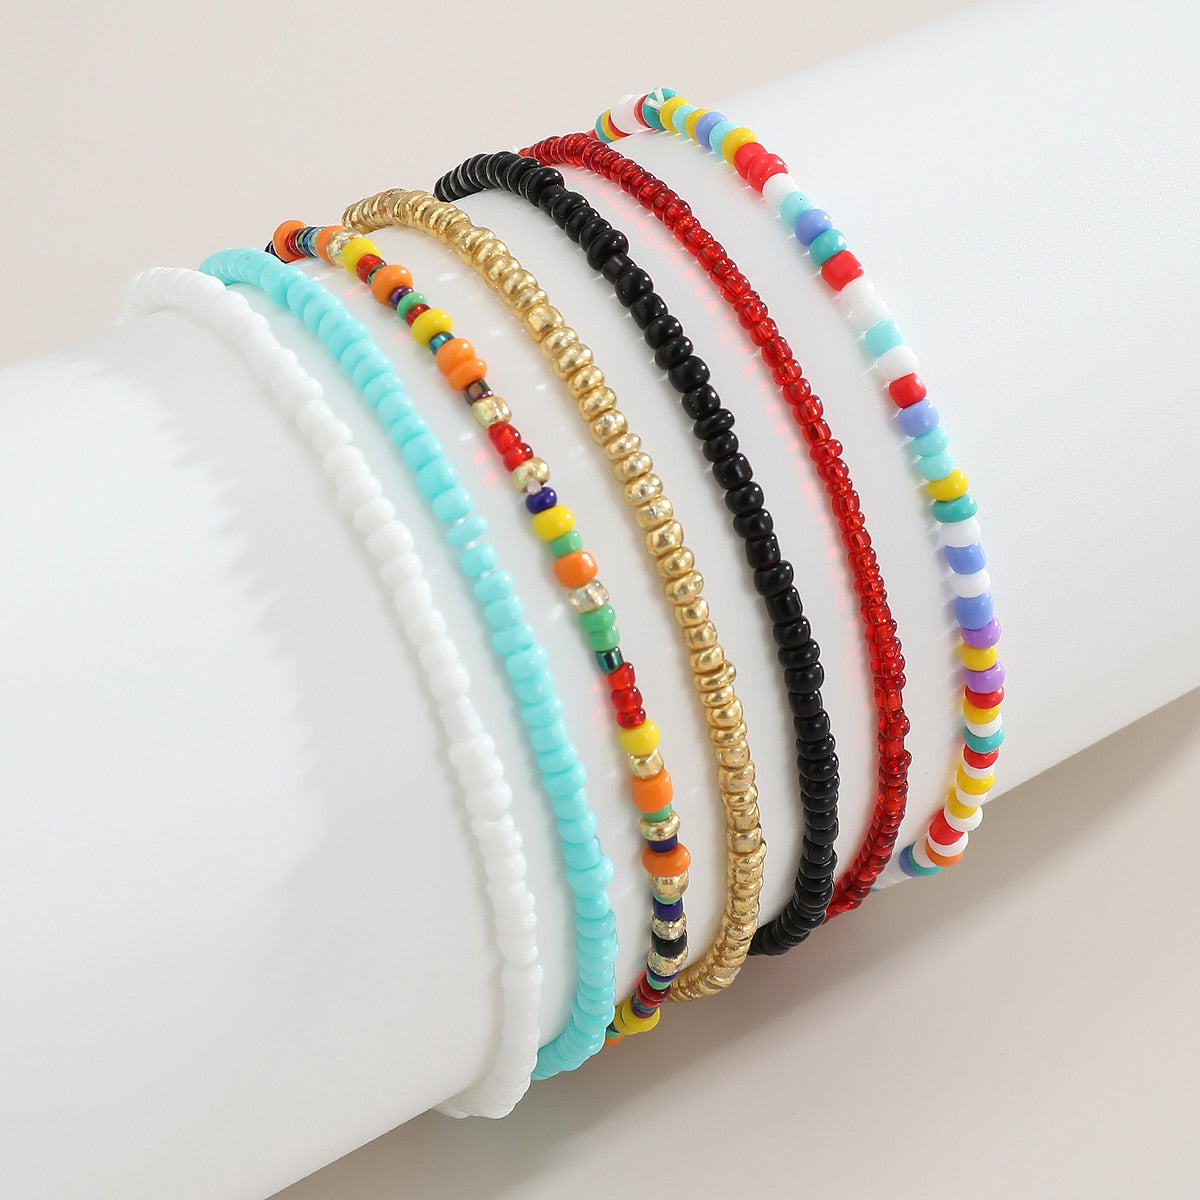 7Pcs/Set Rainbow Beaded Anklet Bracelet for Women Adjustable Colorful Anklets Barefoot Sandals On Foot Ankle Jewelry